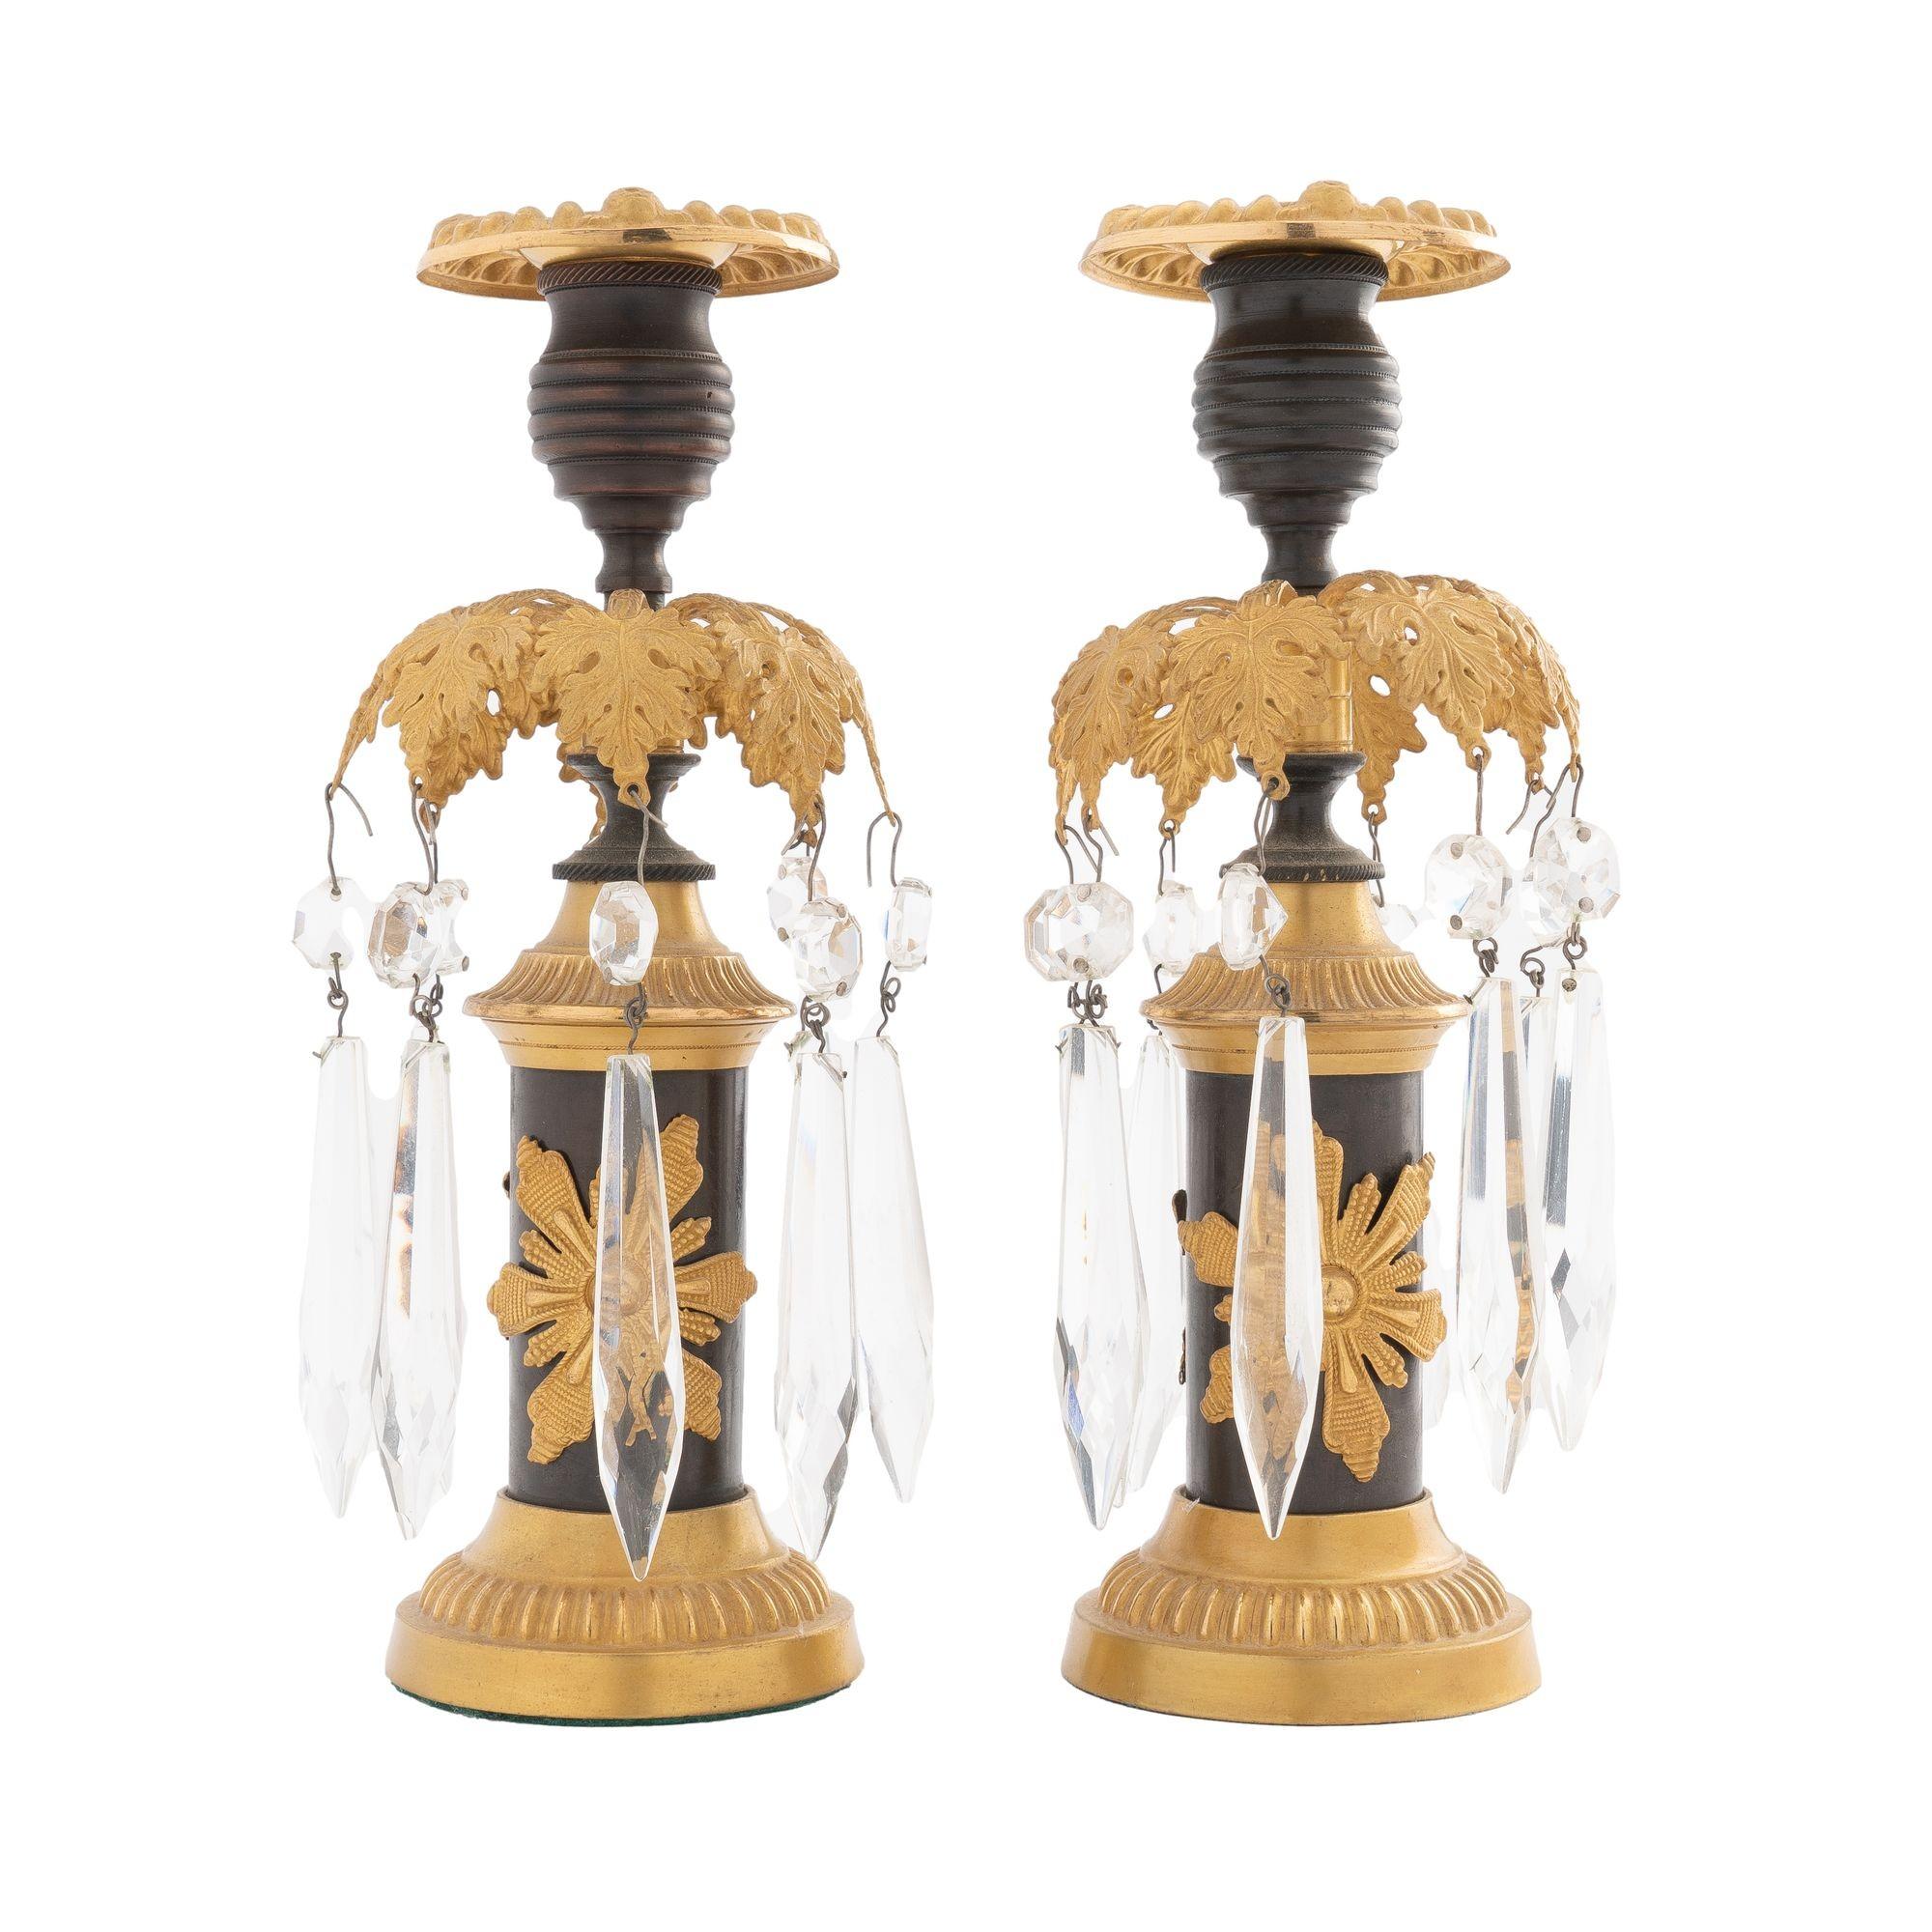 Pair of cast bronze patinated candlesticks with applied stamped & gilt lacquered brass embellishments. The foliate luster ring is hung with tear drop cut crystal lusters. These candlesticks are in excellent original condition and are very fine